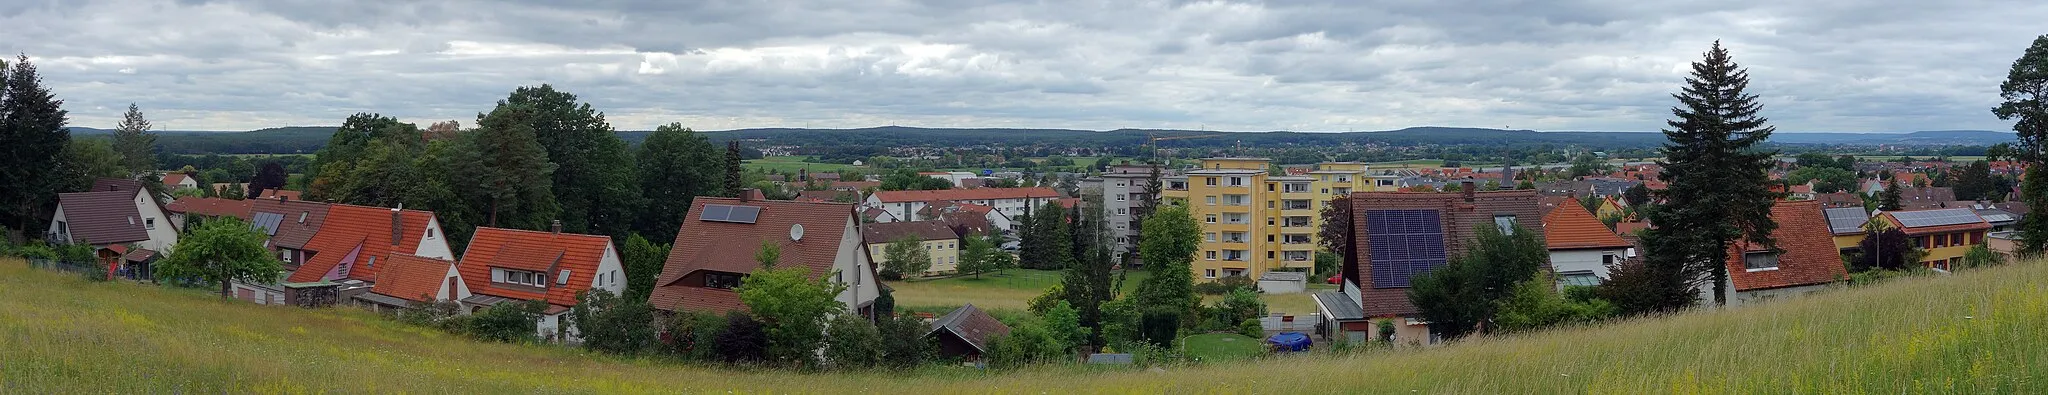 Photo showing: A panorama of Bubenreuth, a village near Erlangen in Germany. In the center background, on the other side of the valley, one can see Möhrendorf.